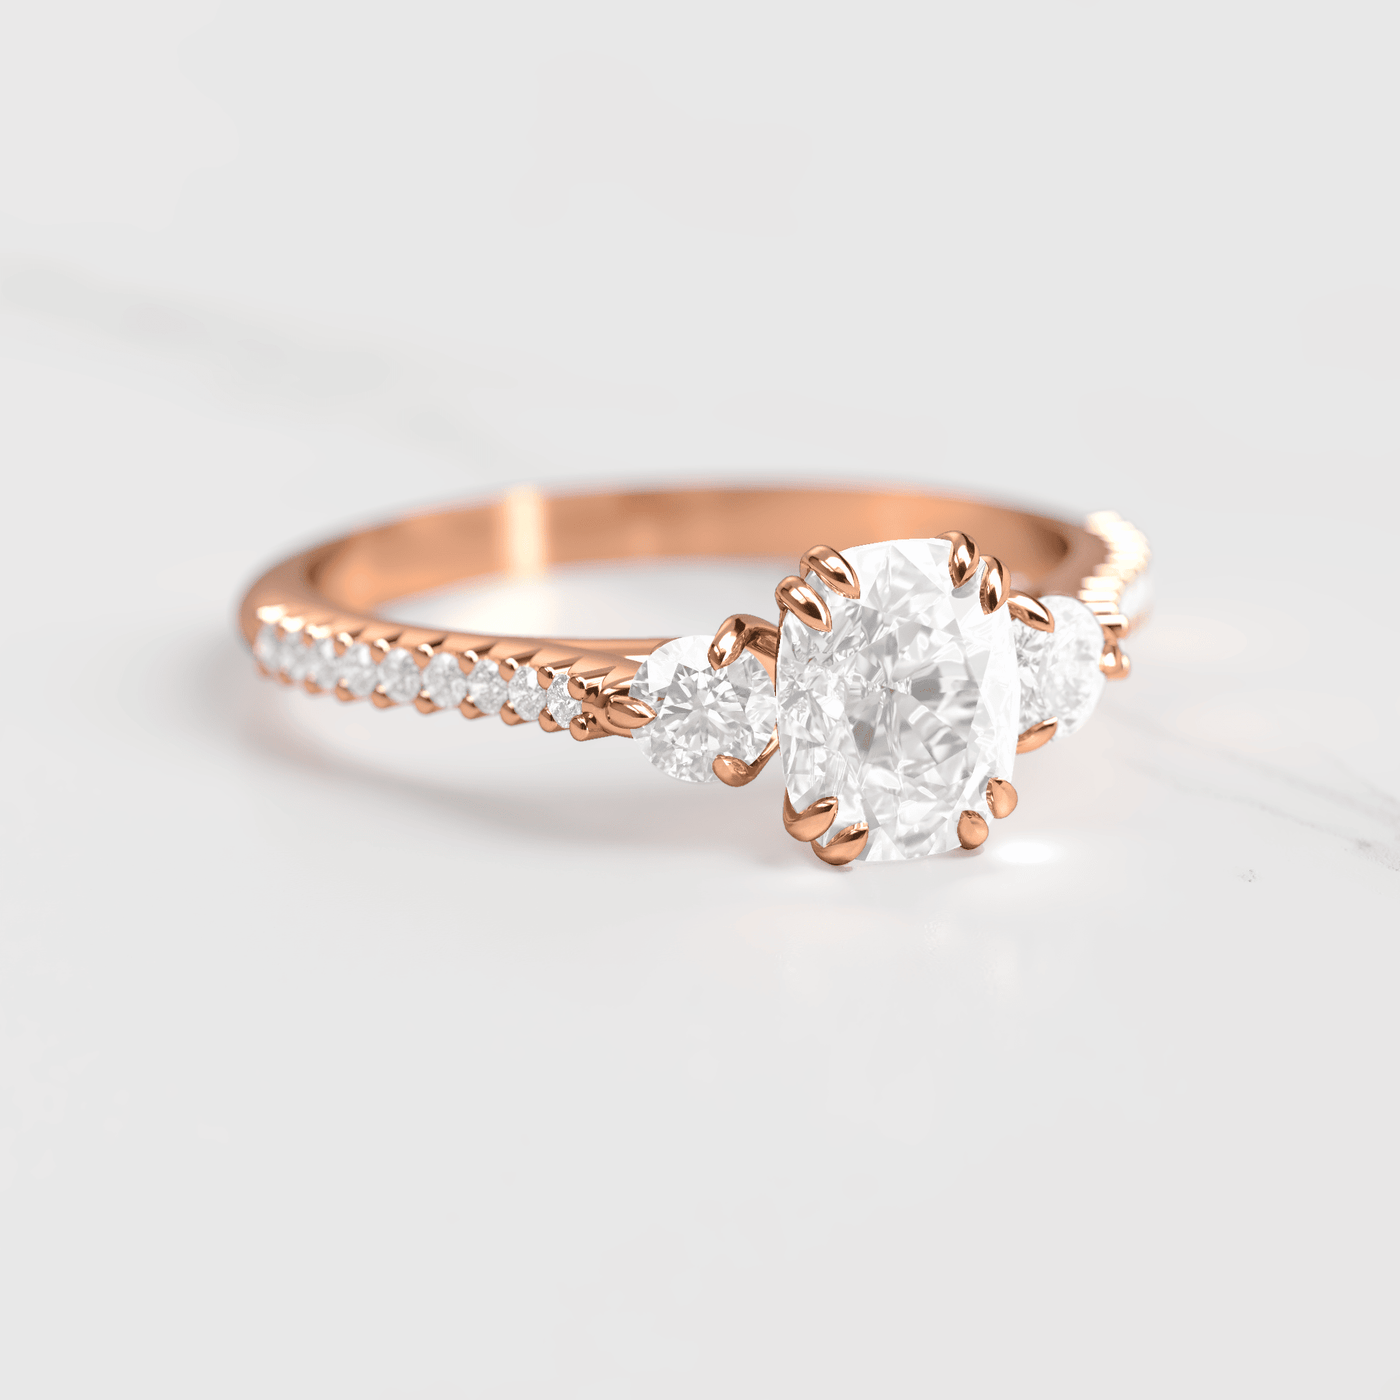 Cushion-Cut White Diamond with 2 Side Diamonds and Half Pave Gold Ring